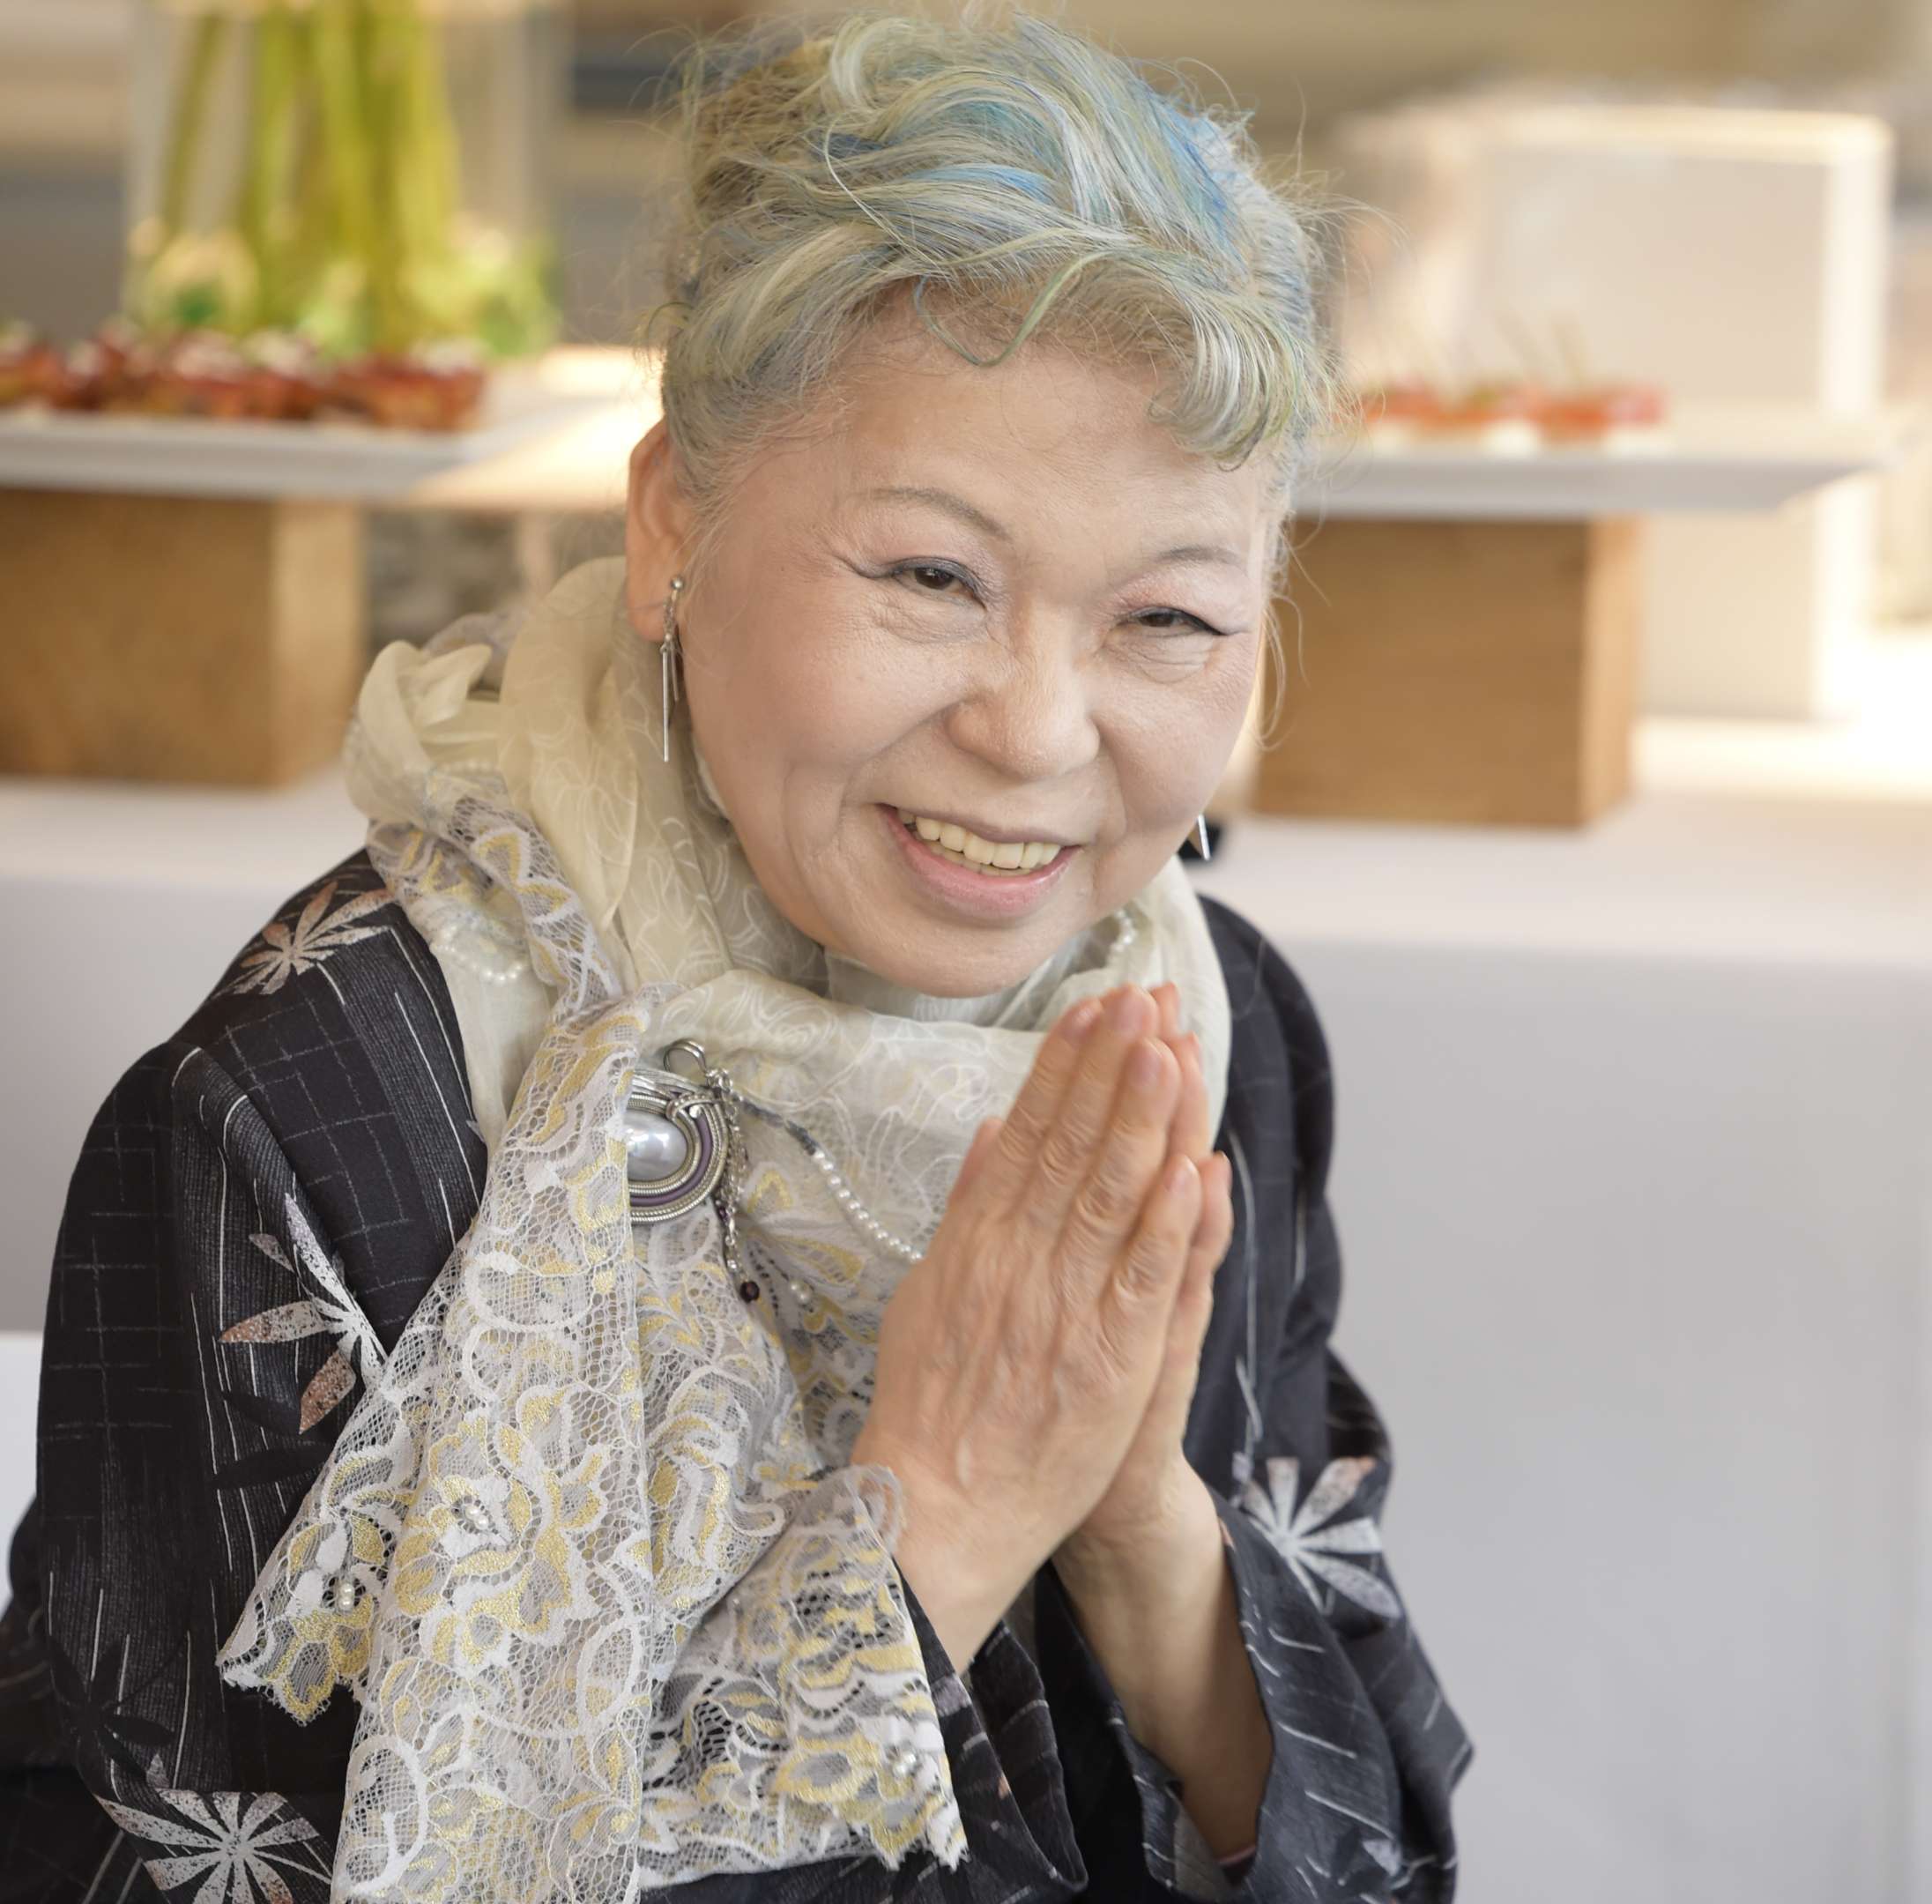 A photograph of Her Holiness, gray-haired, wearing a lace scarf, and offering a warm smile with hands in gassho.